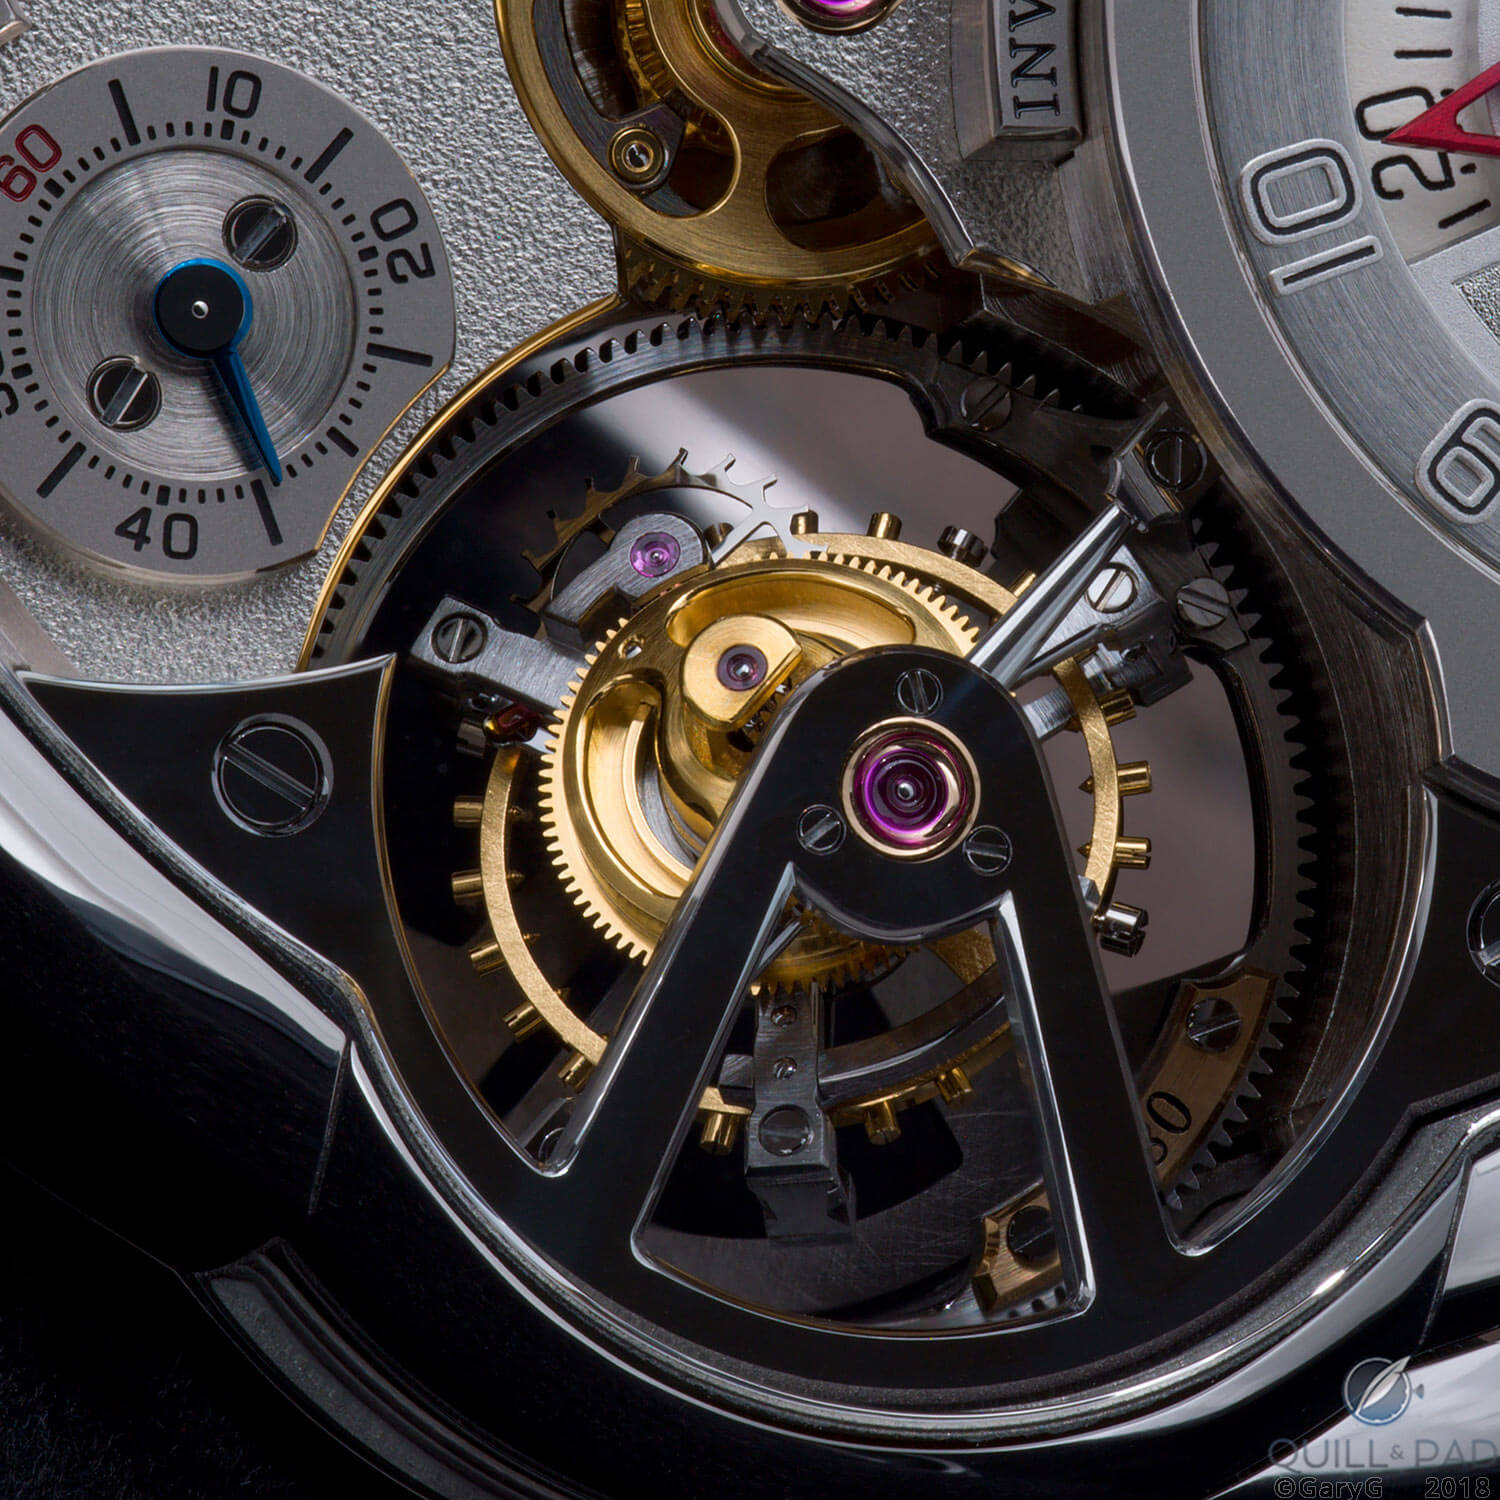 Upside down: left-side inclined double tourbillon, Invention Piece 2